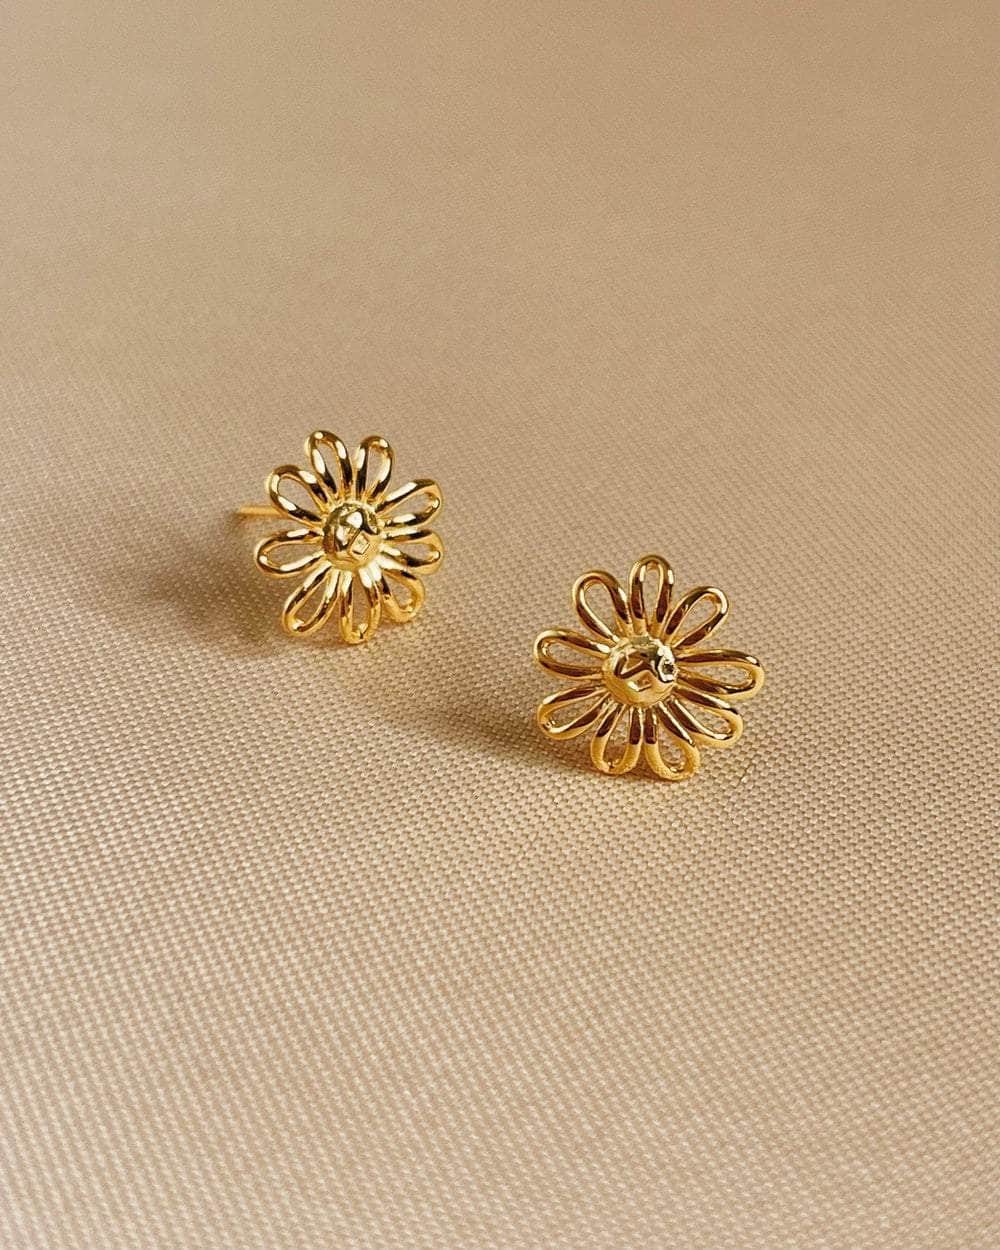 So Dainty Co. Studs Venus Gold Studs Gold Plated 925 Sterling Silver Jewelry